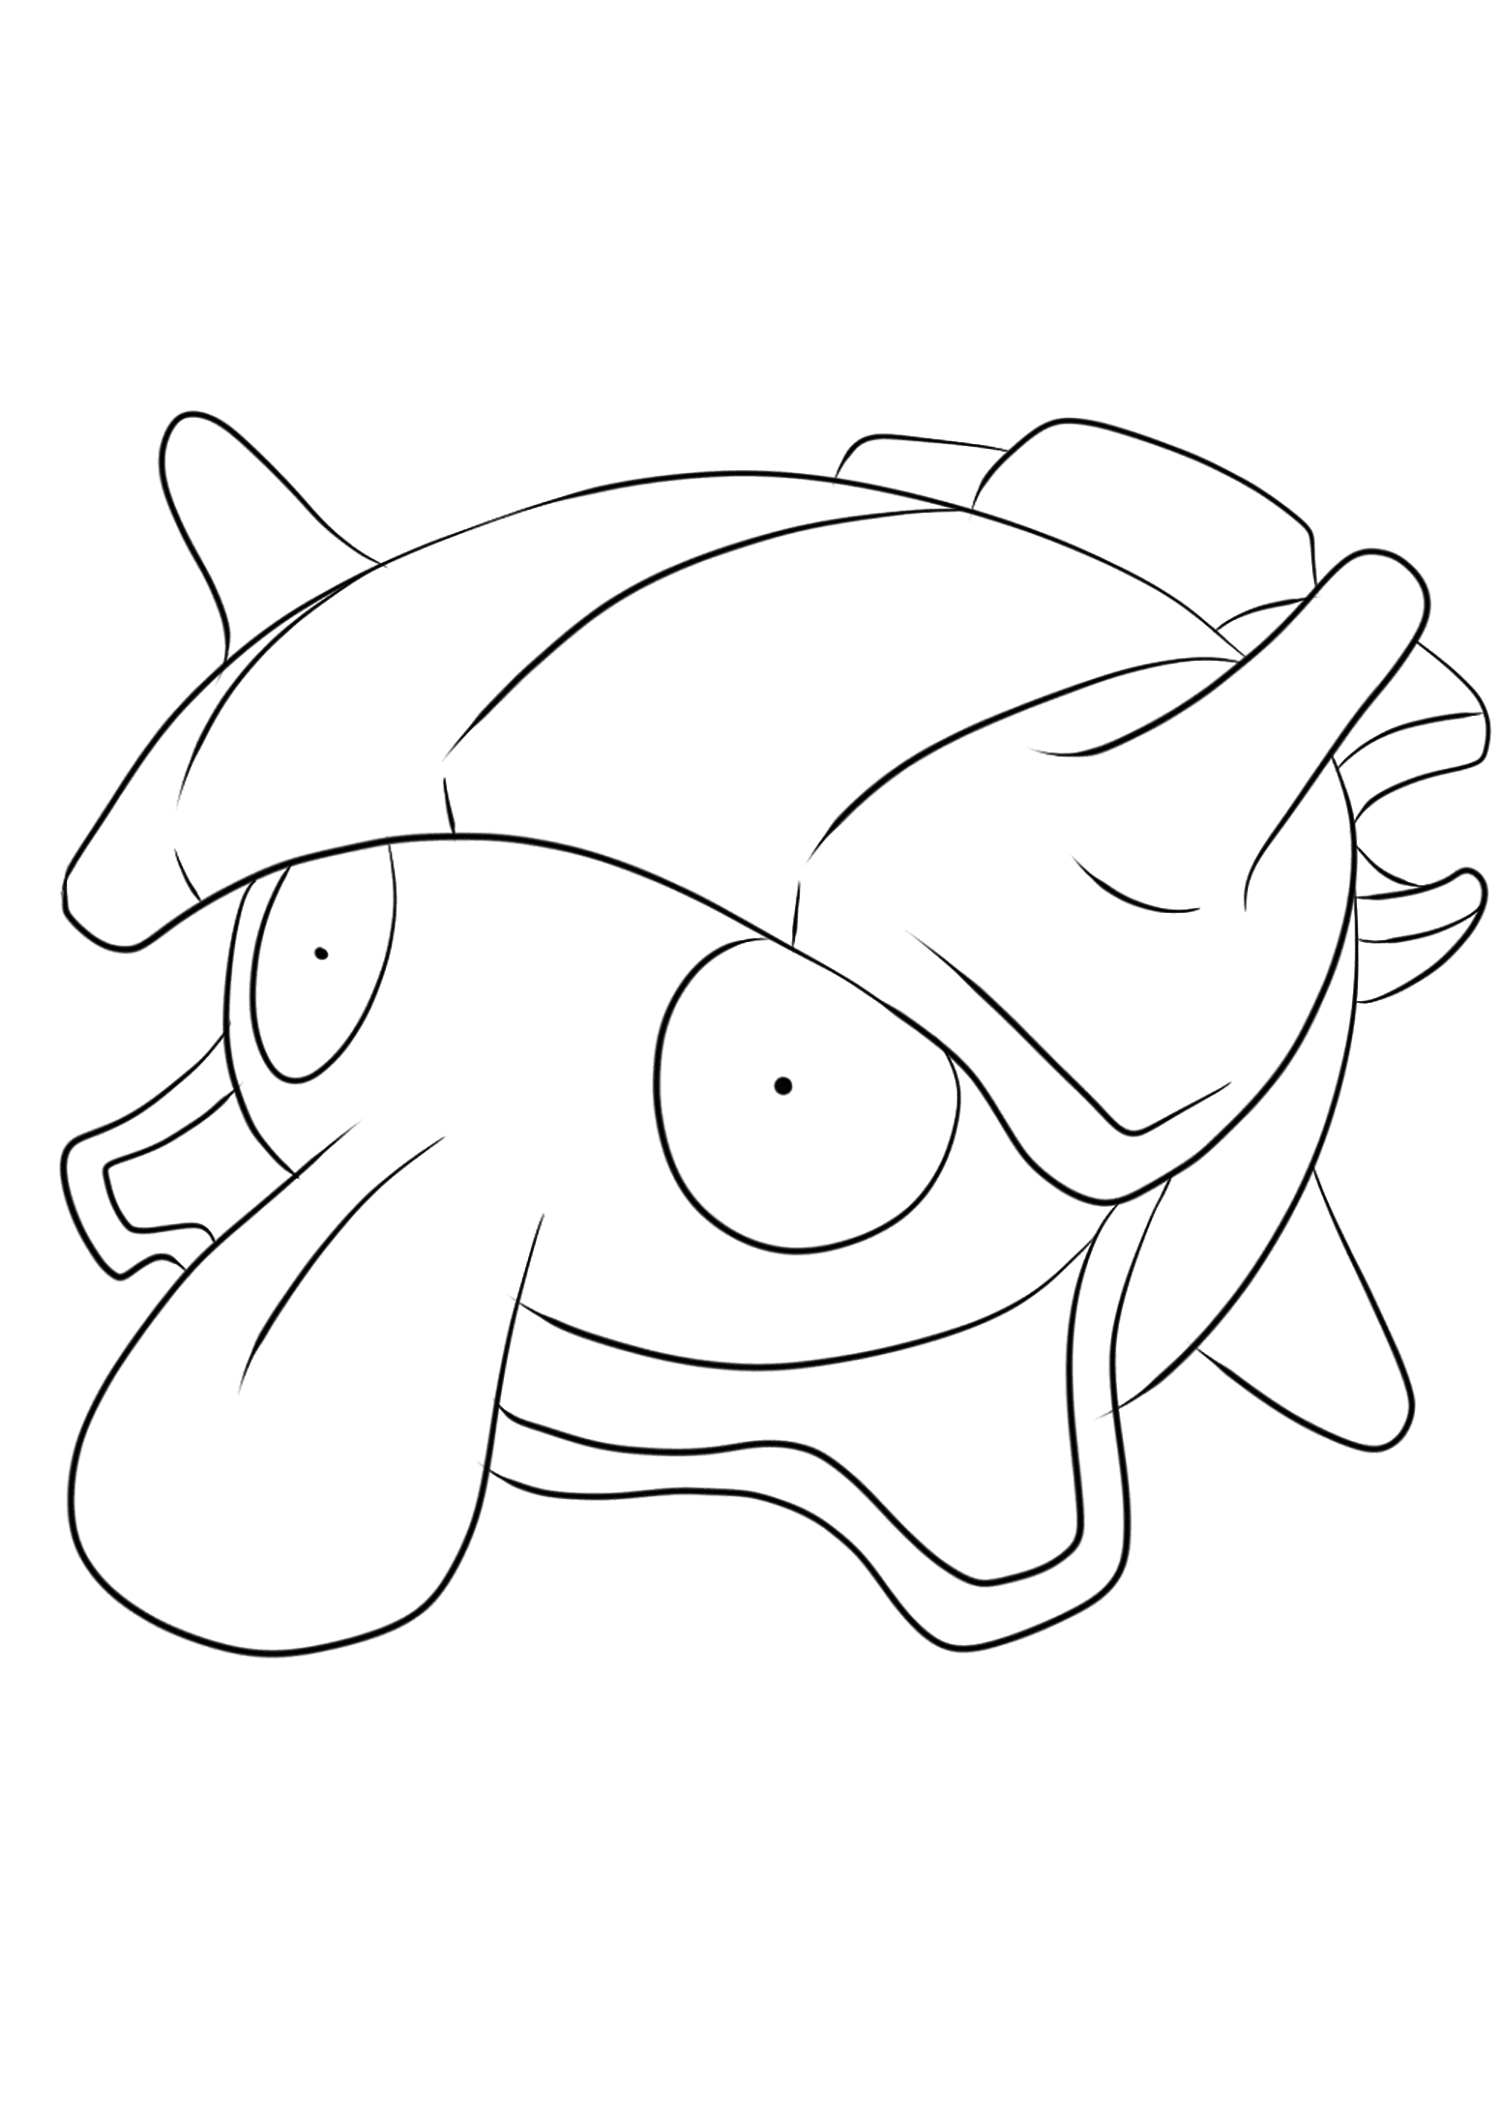 Shellder (No.90). Shellder Coloring page, Generation I Pokemon of type WaterOriginal image credit: Pokemon linearts by Lilly Gerbil on Deviantart.Permission:  All rights reserved © Pokemon company and Ken Sugimori.